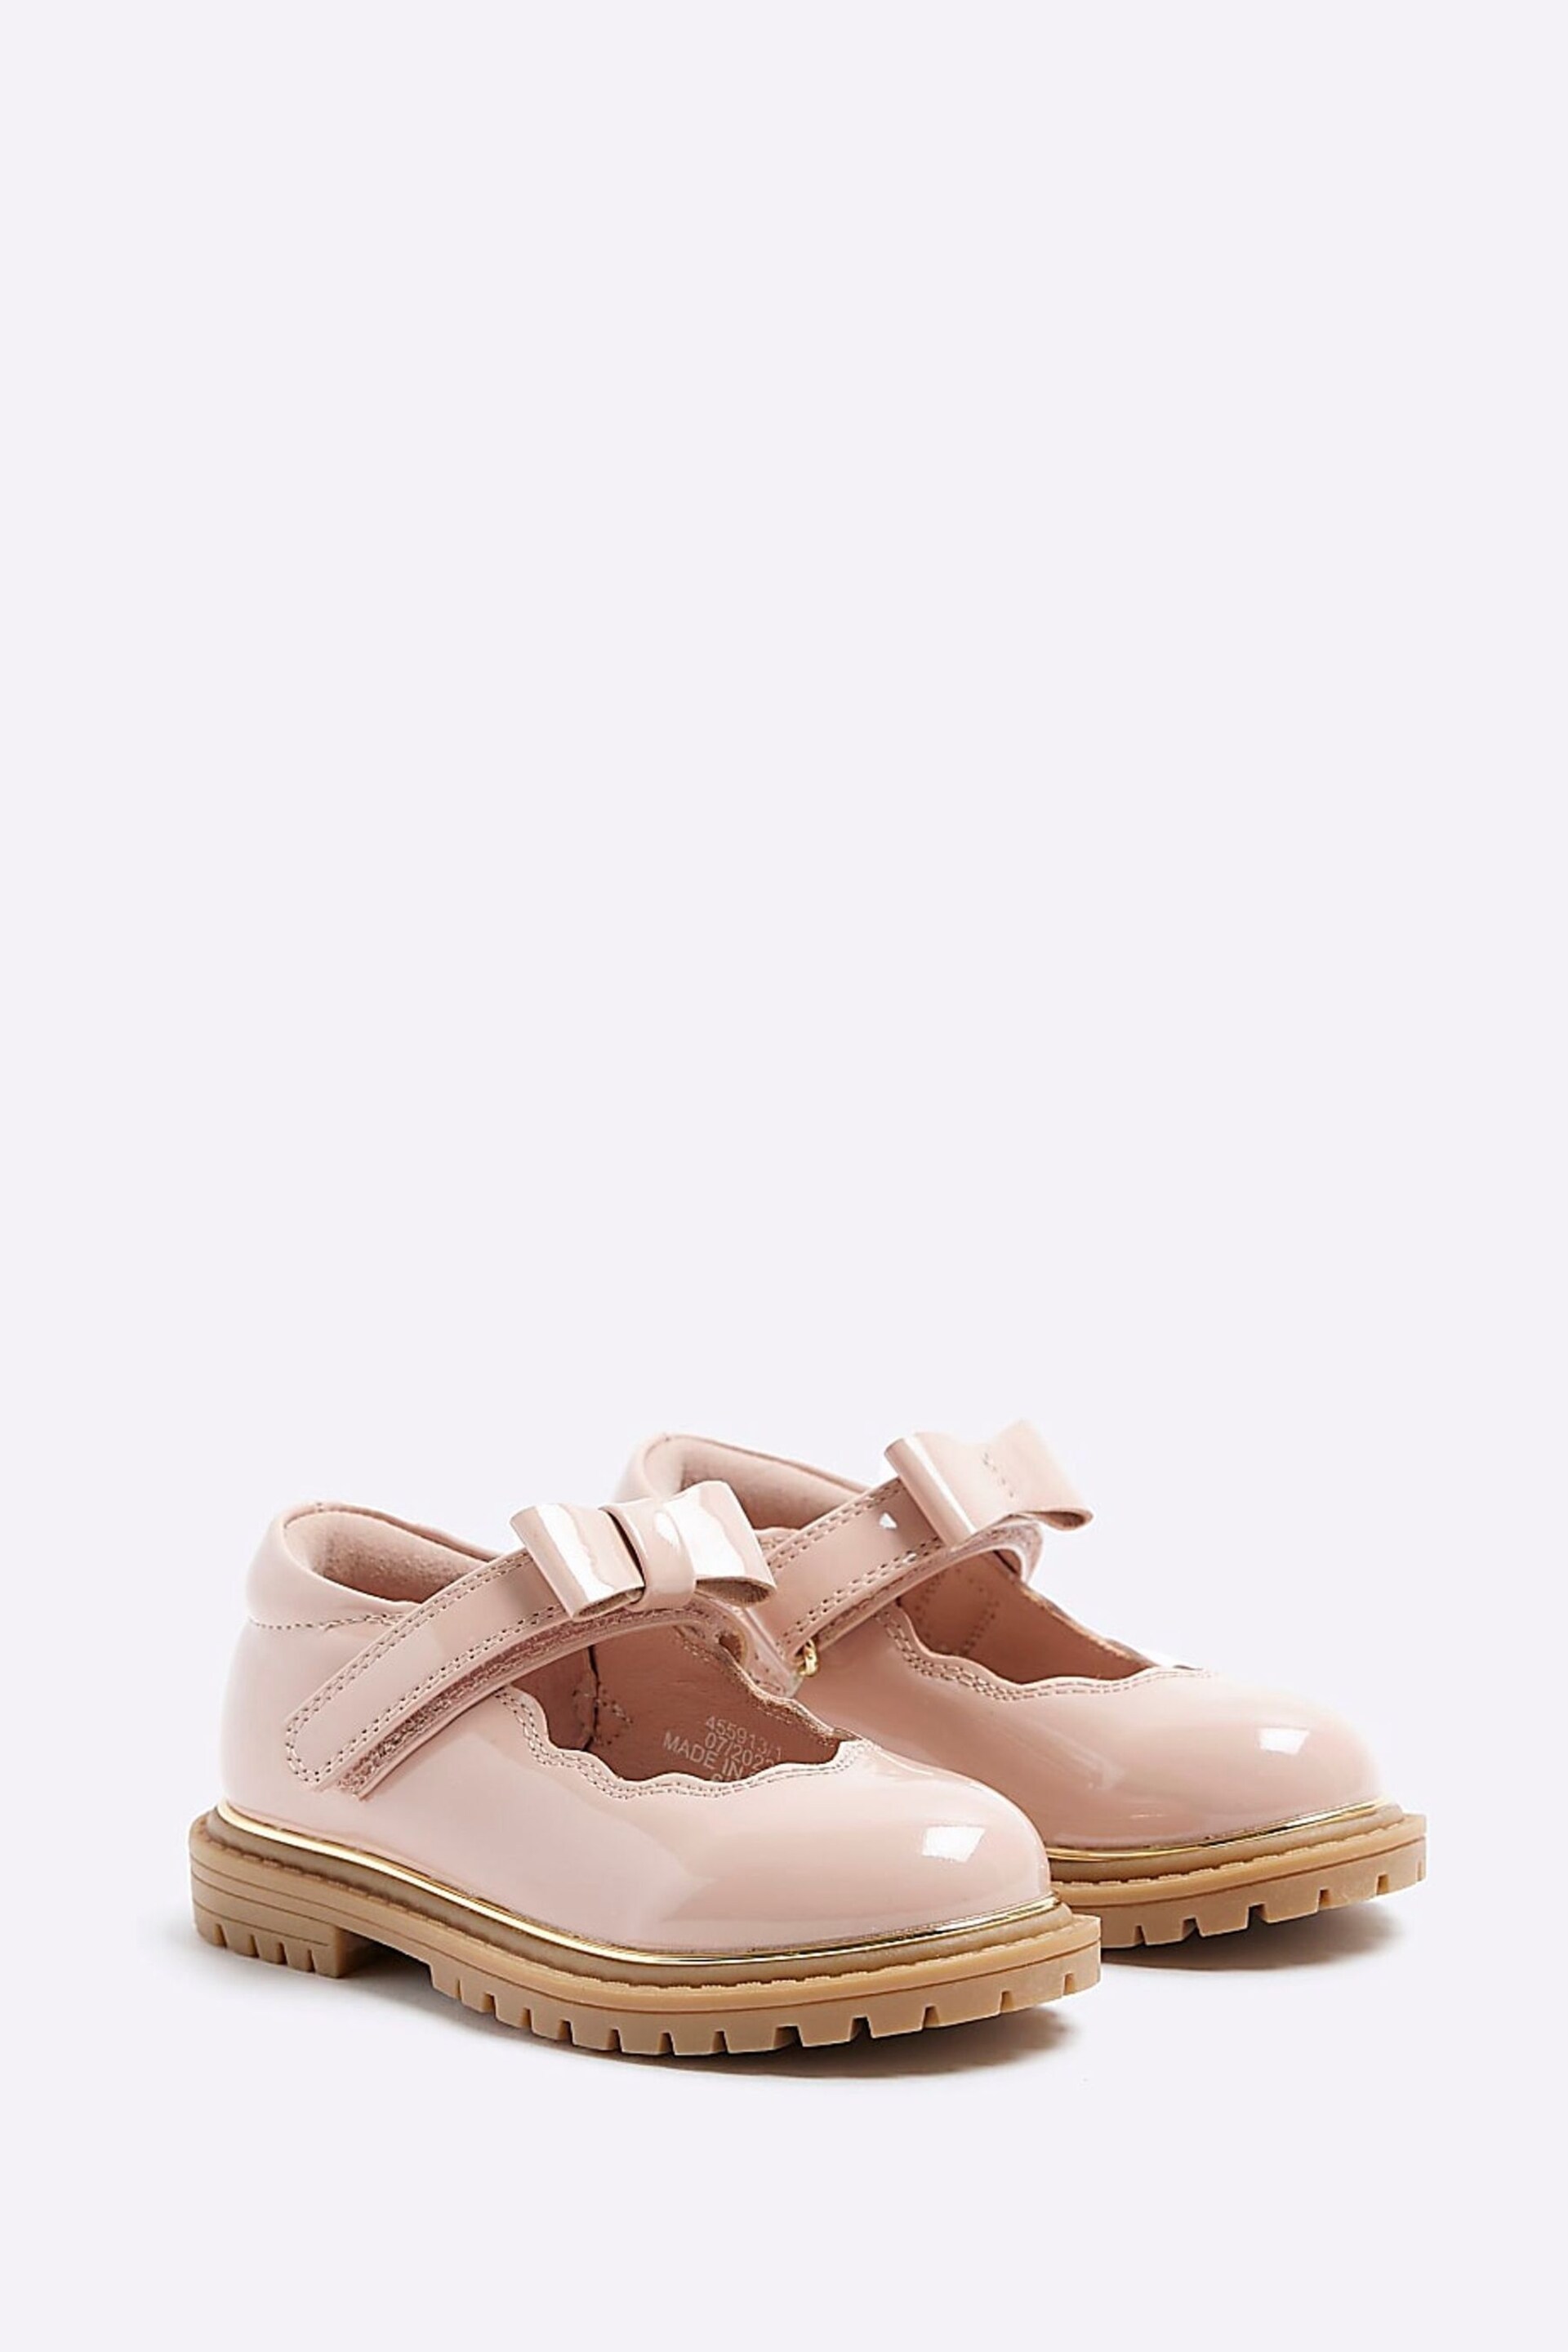 River Island Pink Girls Scallop Bow Mary Jane Shoes - Image 2 of 5